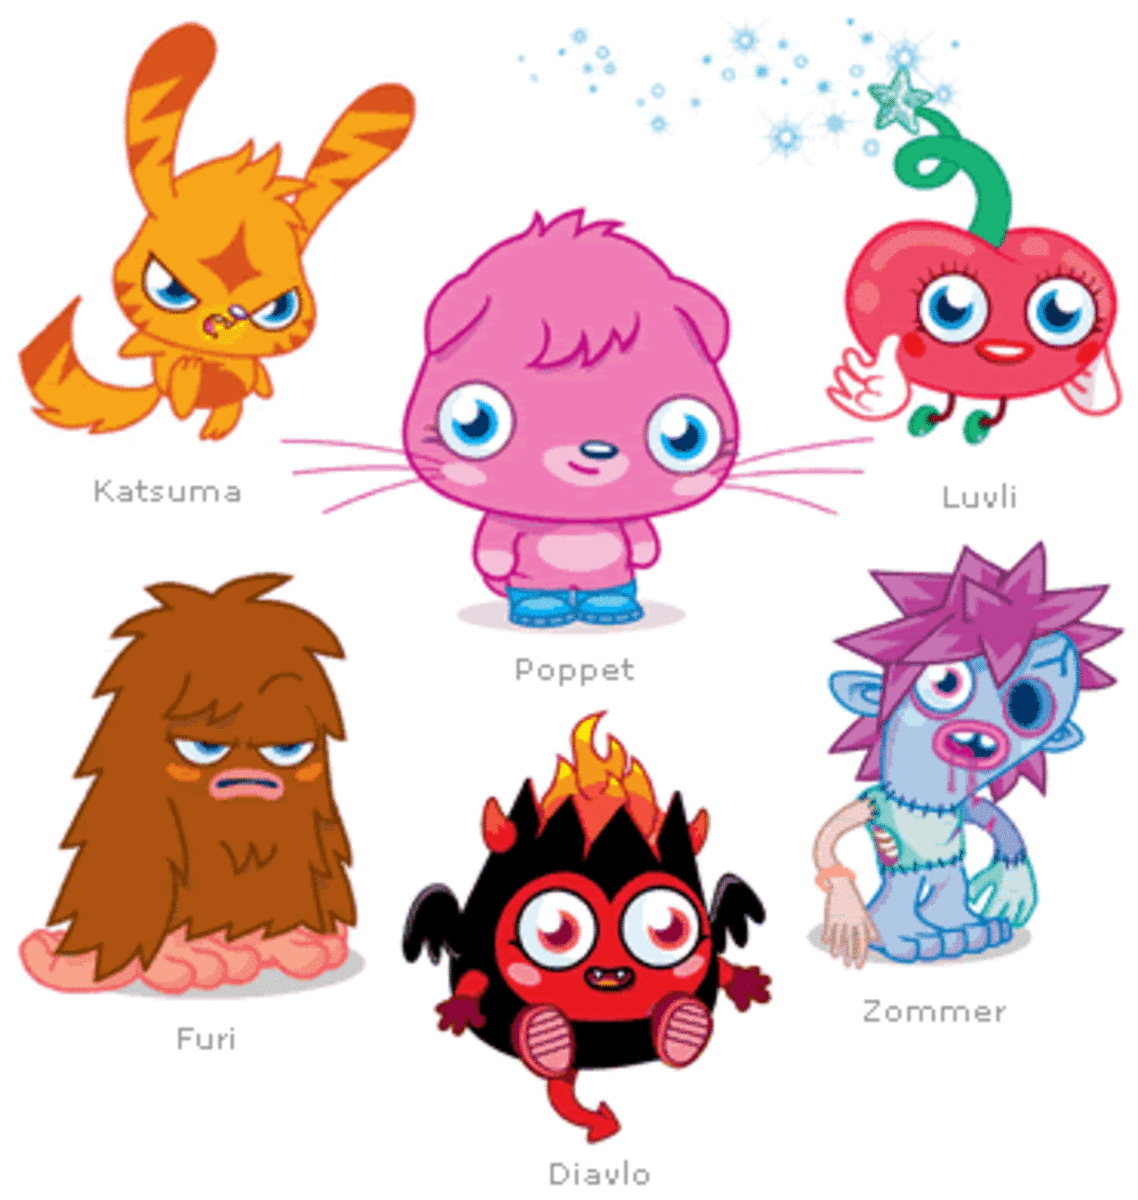 Fun with Free Moshi Monsters Colouring Pages